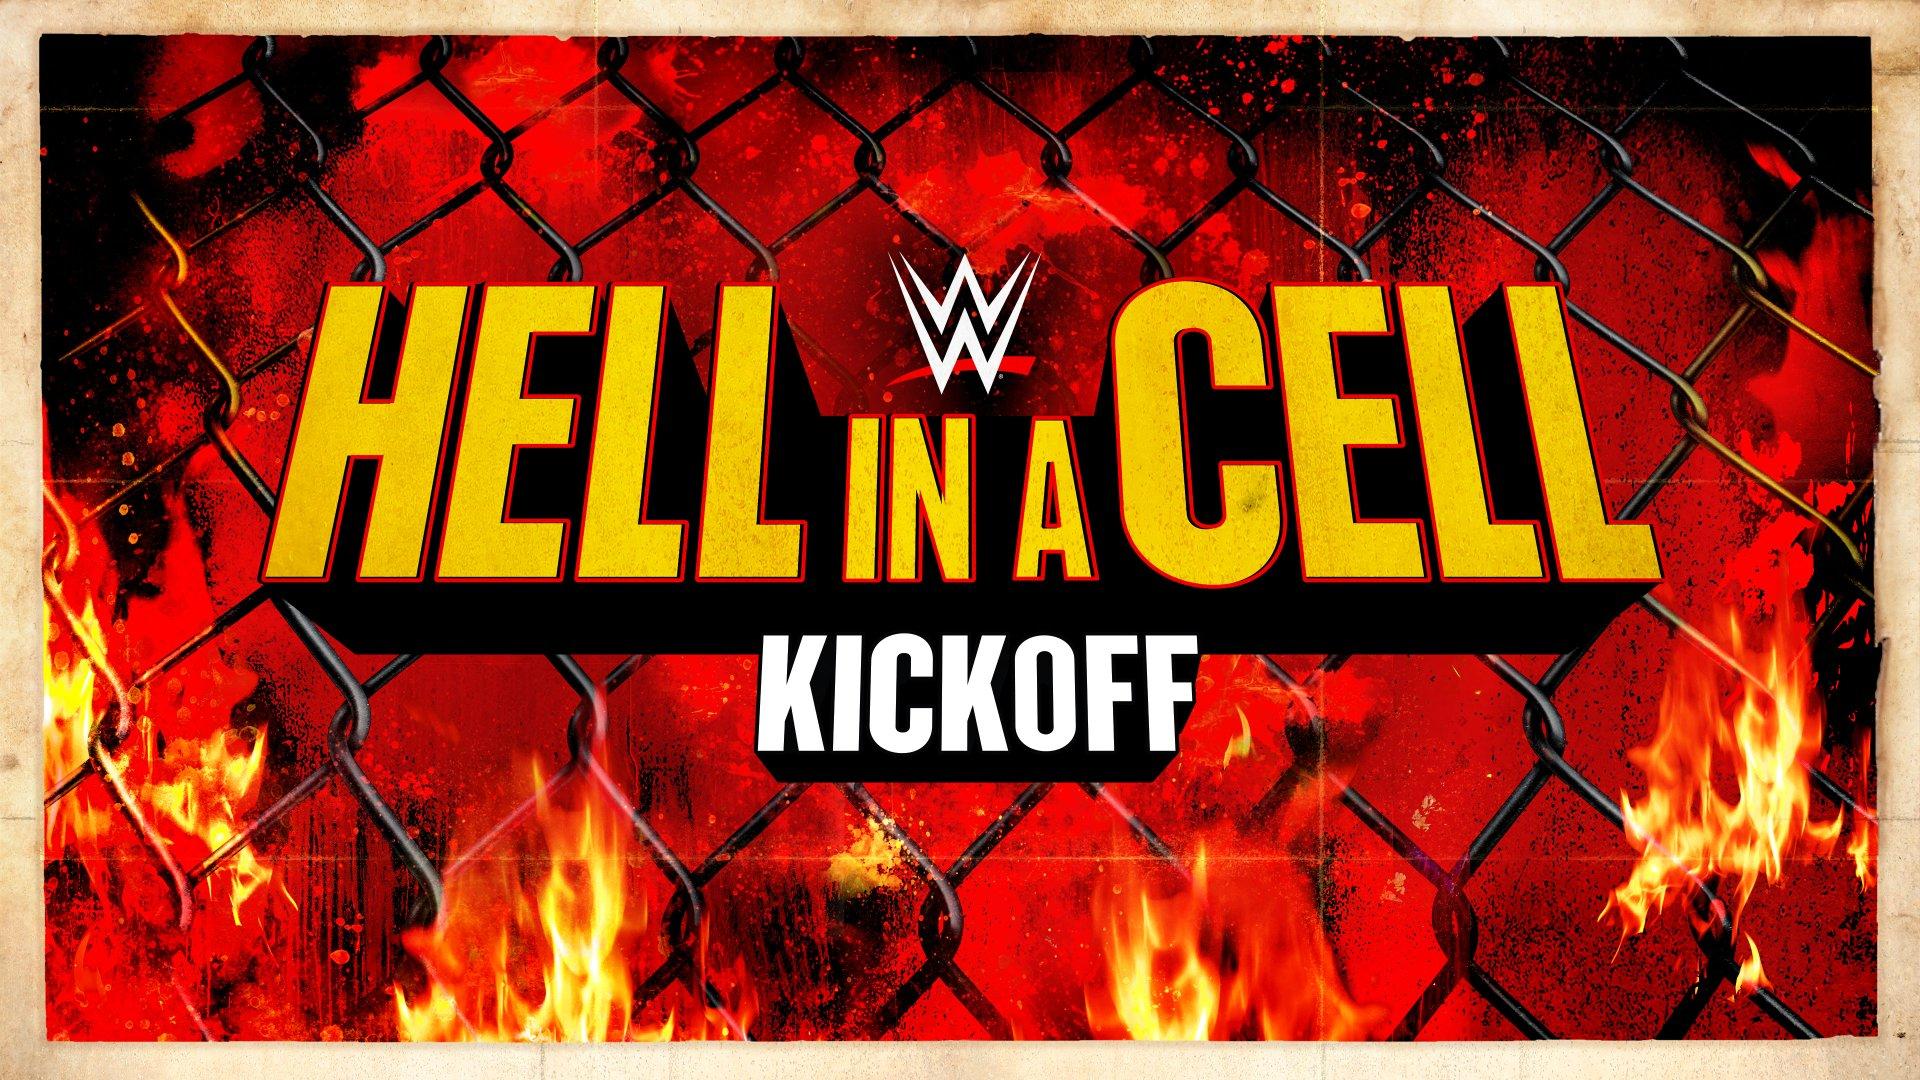 WWE Hell in a Cell 2020 Kickoff